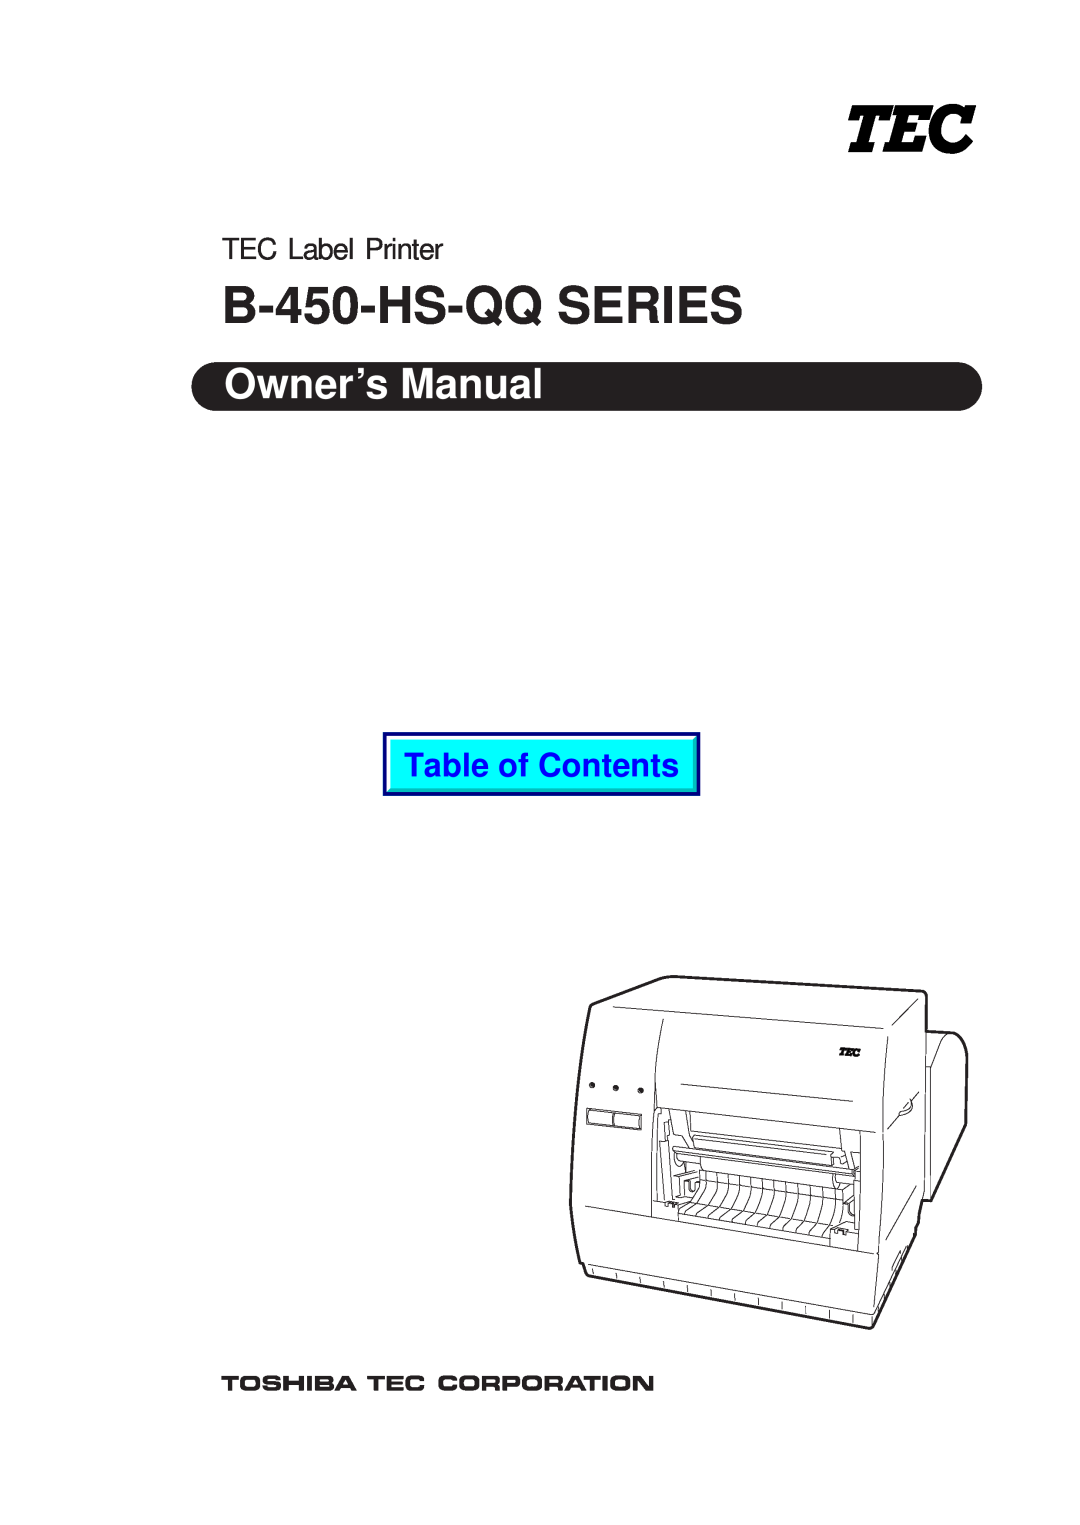 Toshiba owner manual B-450-HS-QQ SERIES, Owner’s Manual, Table of Contents, TEC Label Printer 